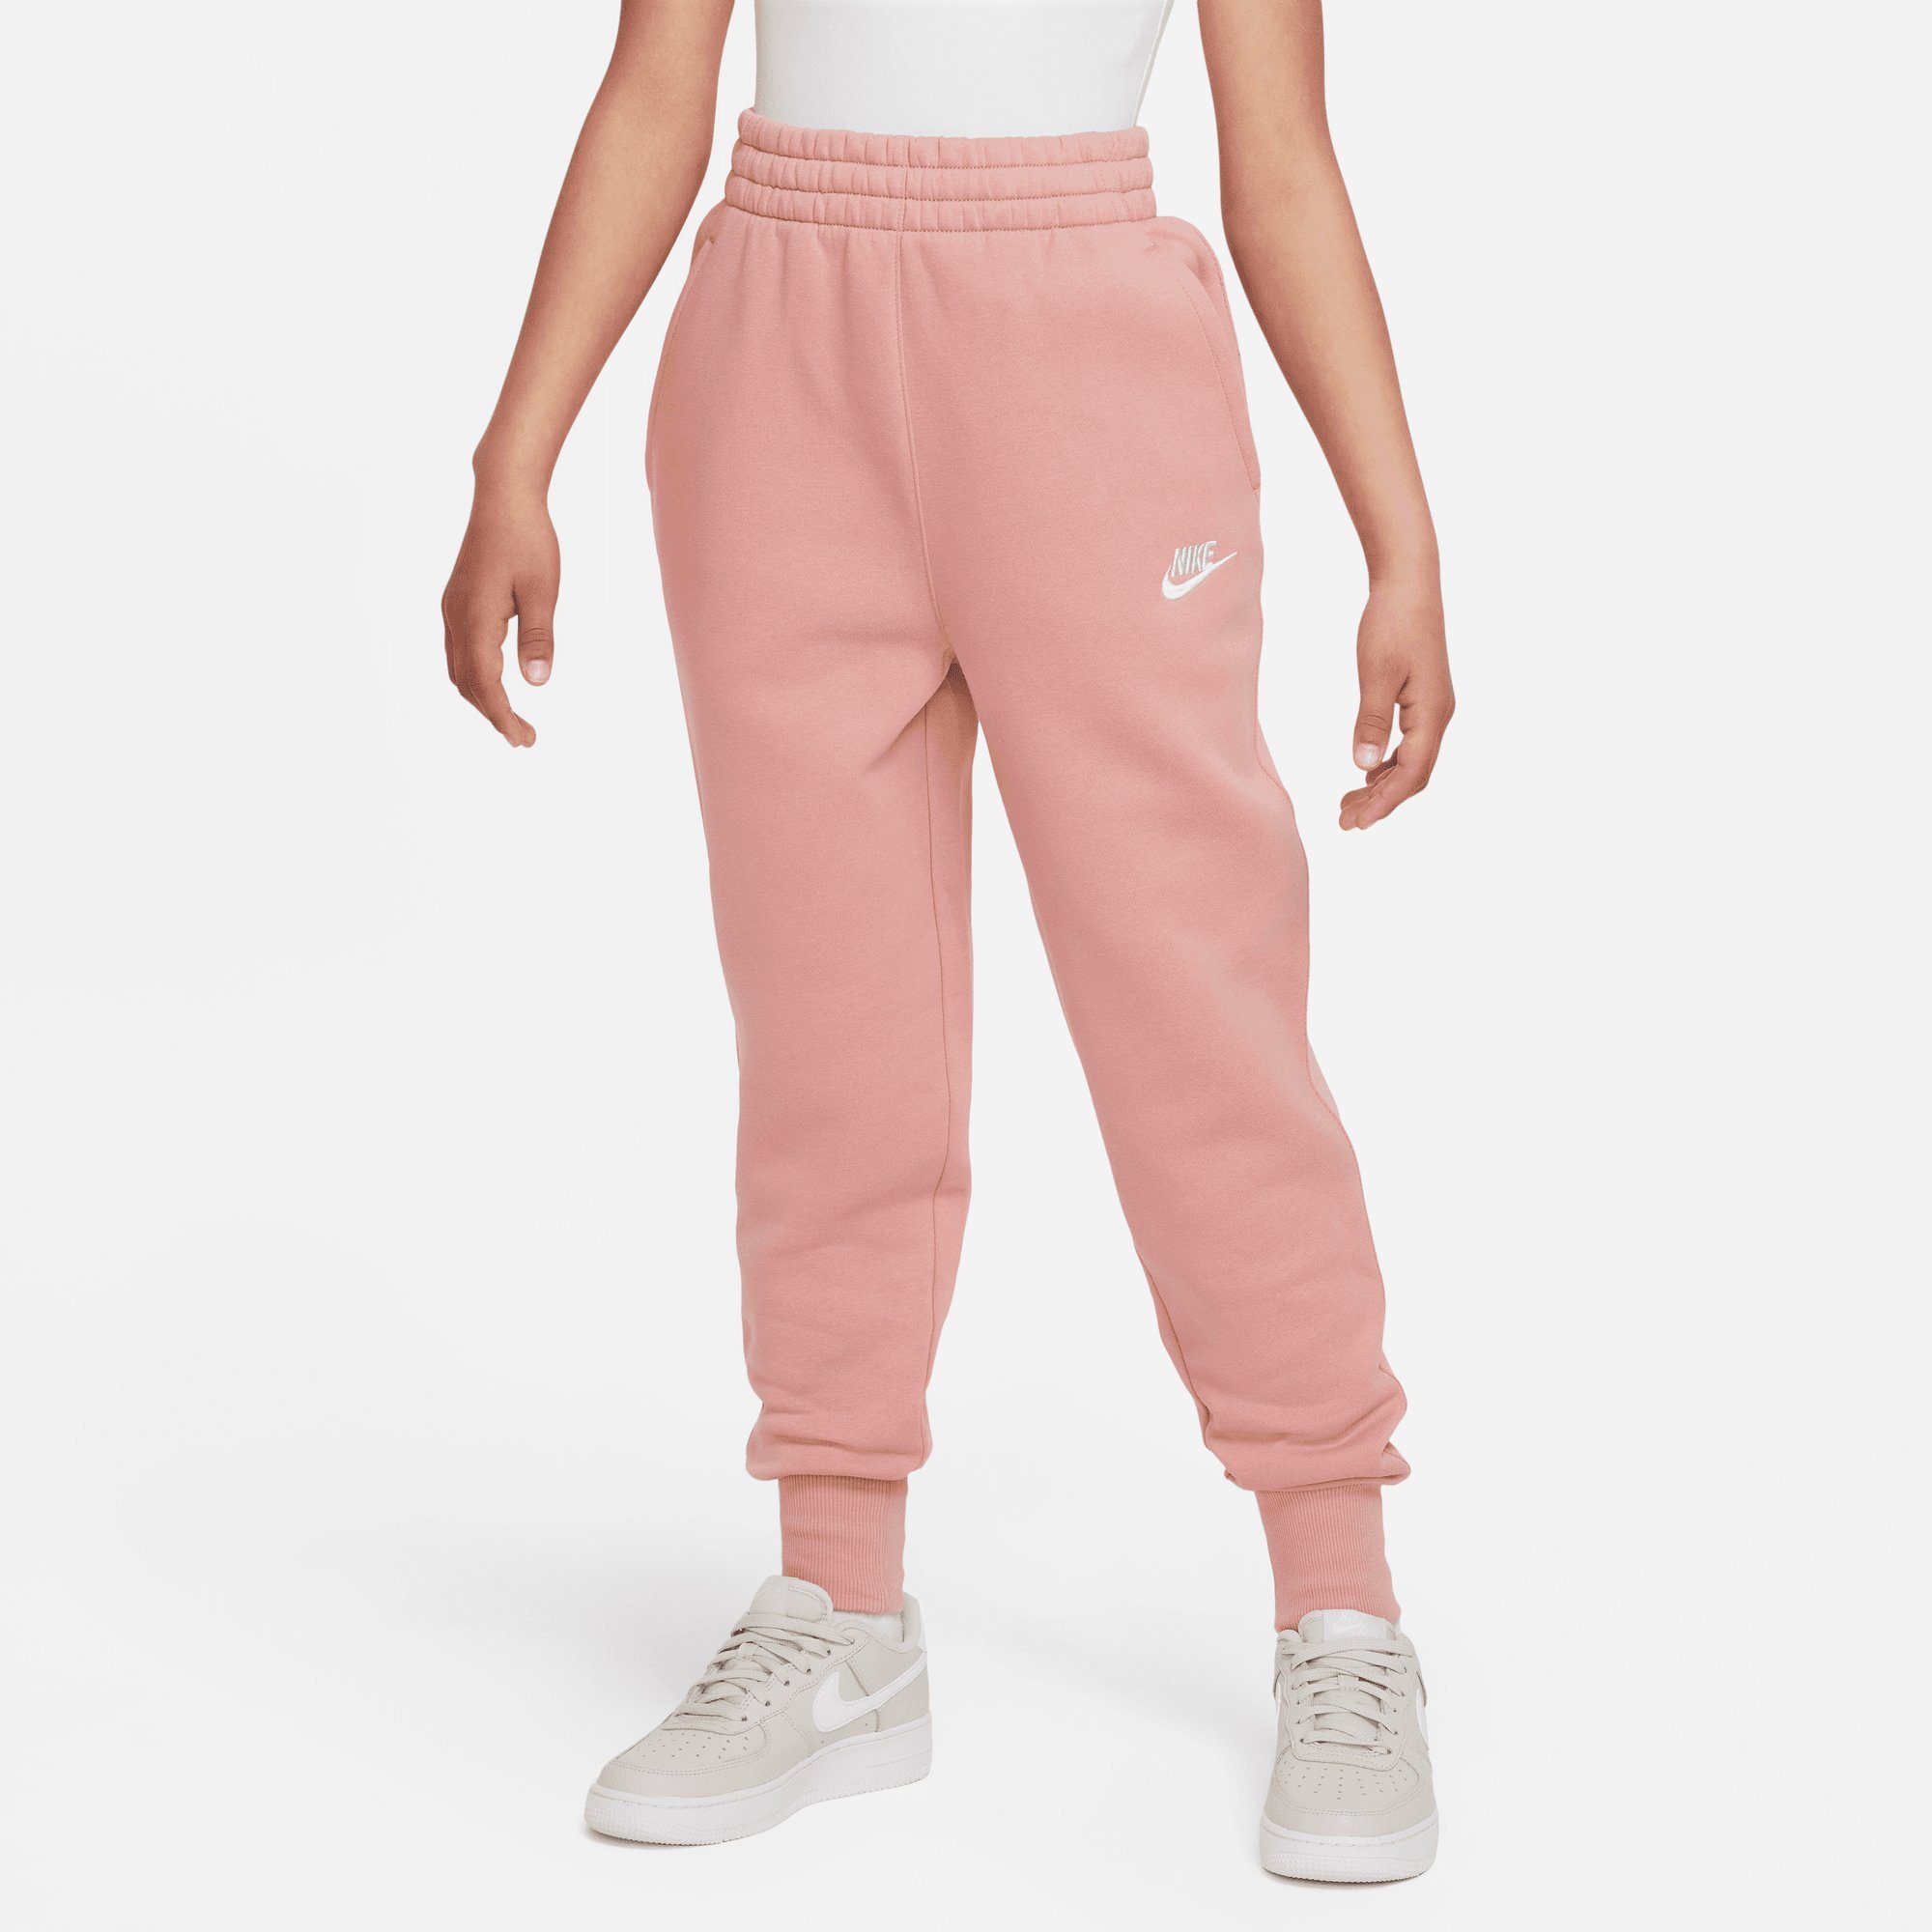 BIG STARDUST/WHITE Nike HIGH-WAISTED FITTED KIDS' (GIRLS) Sportswear CLUB Jogginghose FLEECE RED PANTS STARDUST/RED